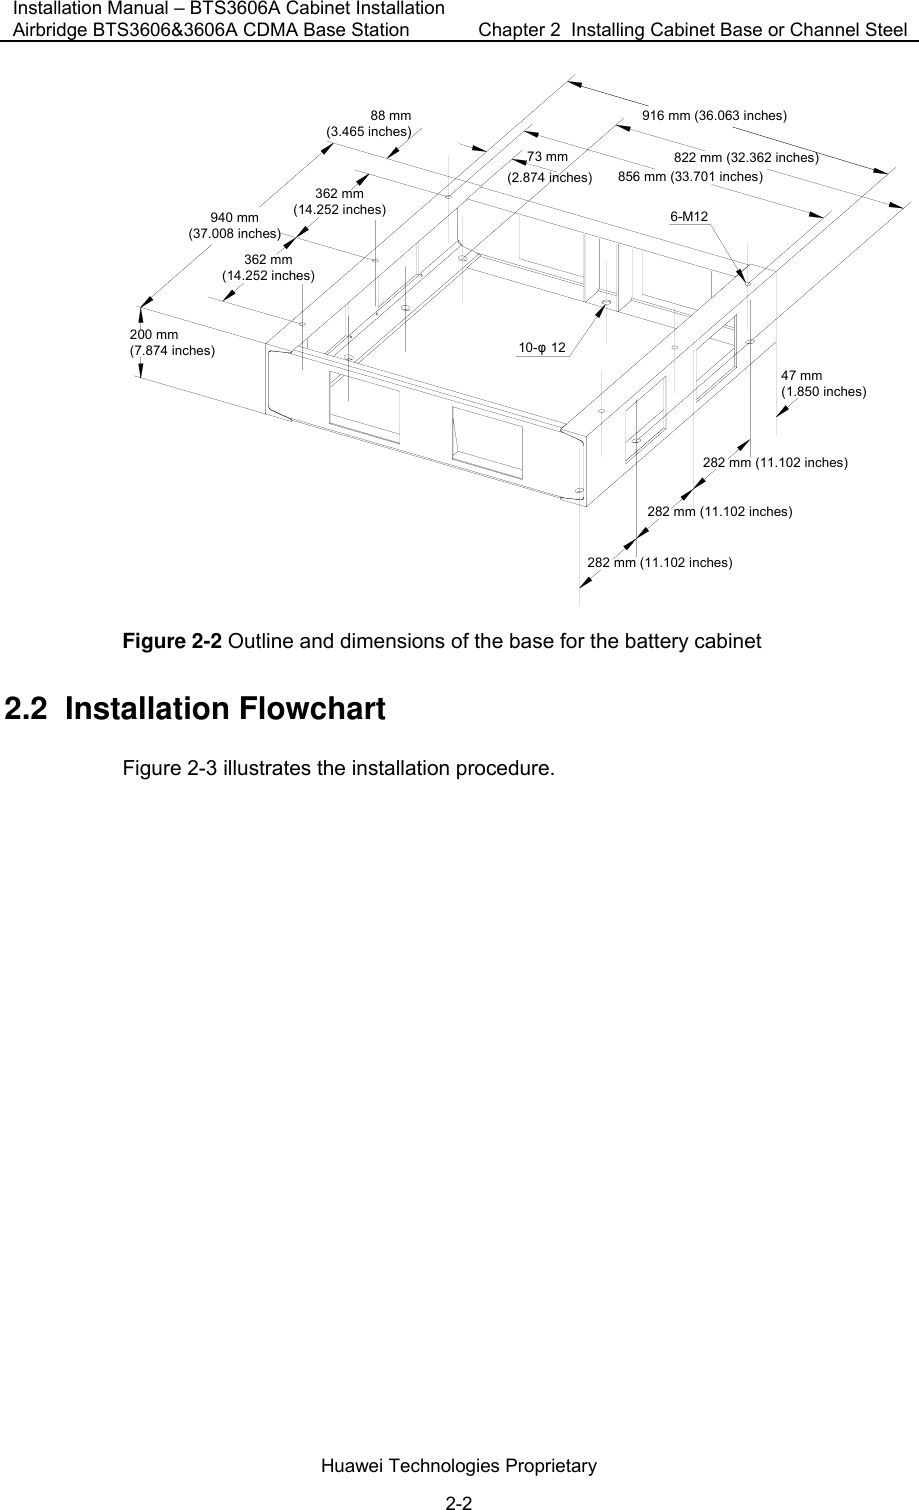 Installation Manual – BTS3606A Cabinet Installation Airbridge BTS3606&amp;3606A CDMA Base Station  Chapter 2  Installing Cabinet Base or Channel Steel  Huawei Technologies Proprietary 2-2 916 mm (36.063 inches)822 mm (32.362 inches)856 mm (33.701 inches)73 mm88 mm(3.465 inches)362 mm(14.252 inches)940 mm(37.008 inches)200 mm(7.874 inches)282 mm (11.102 inches)47 mm(1.850 inches)6-M1210-φ12(2.874 inches)362 mm(14.252 inches)282 mm (11.102 inches)282 mm (11.102 inches) Figure 2-2 Outline and dimensions of the base for the battery cabinet 2.2  Installation Flowchart Figure 2-3 illustrates the installation procedure. 